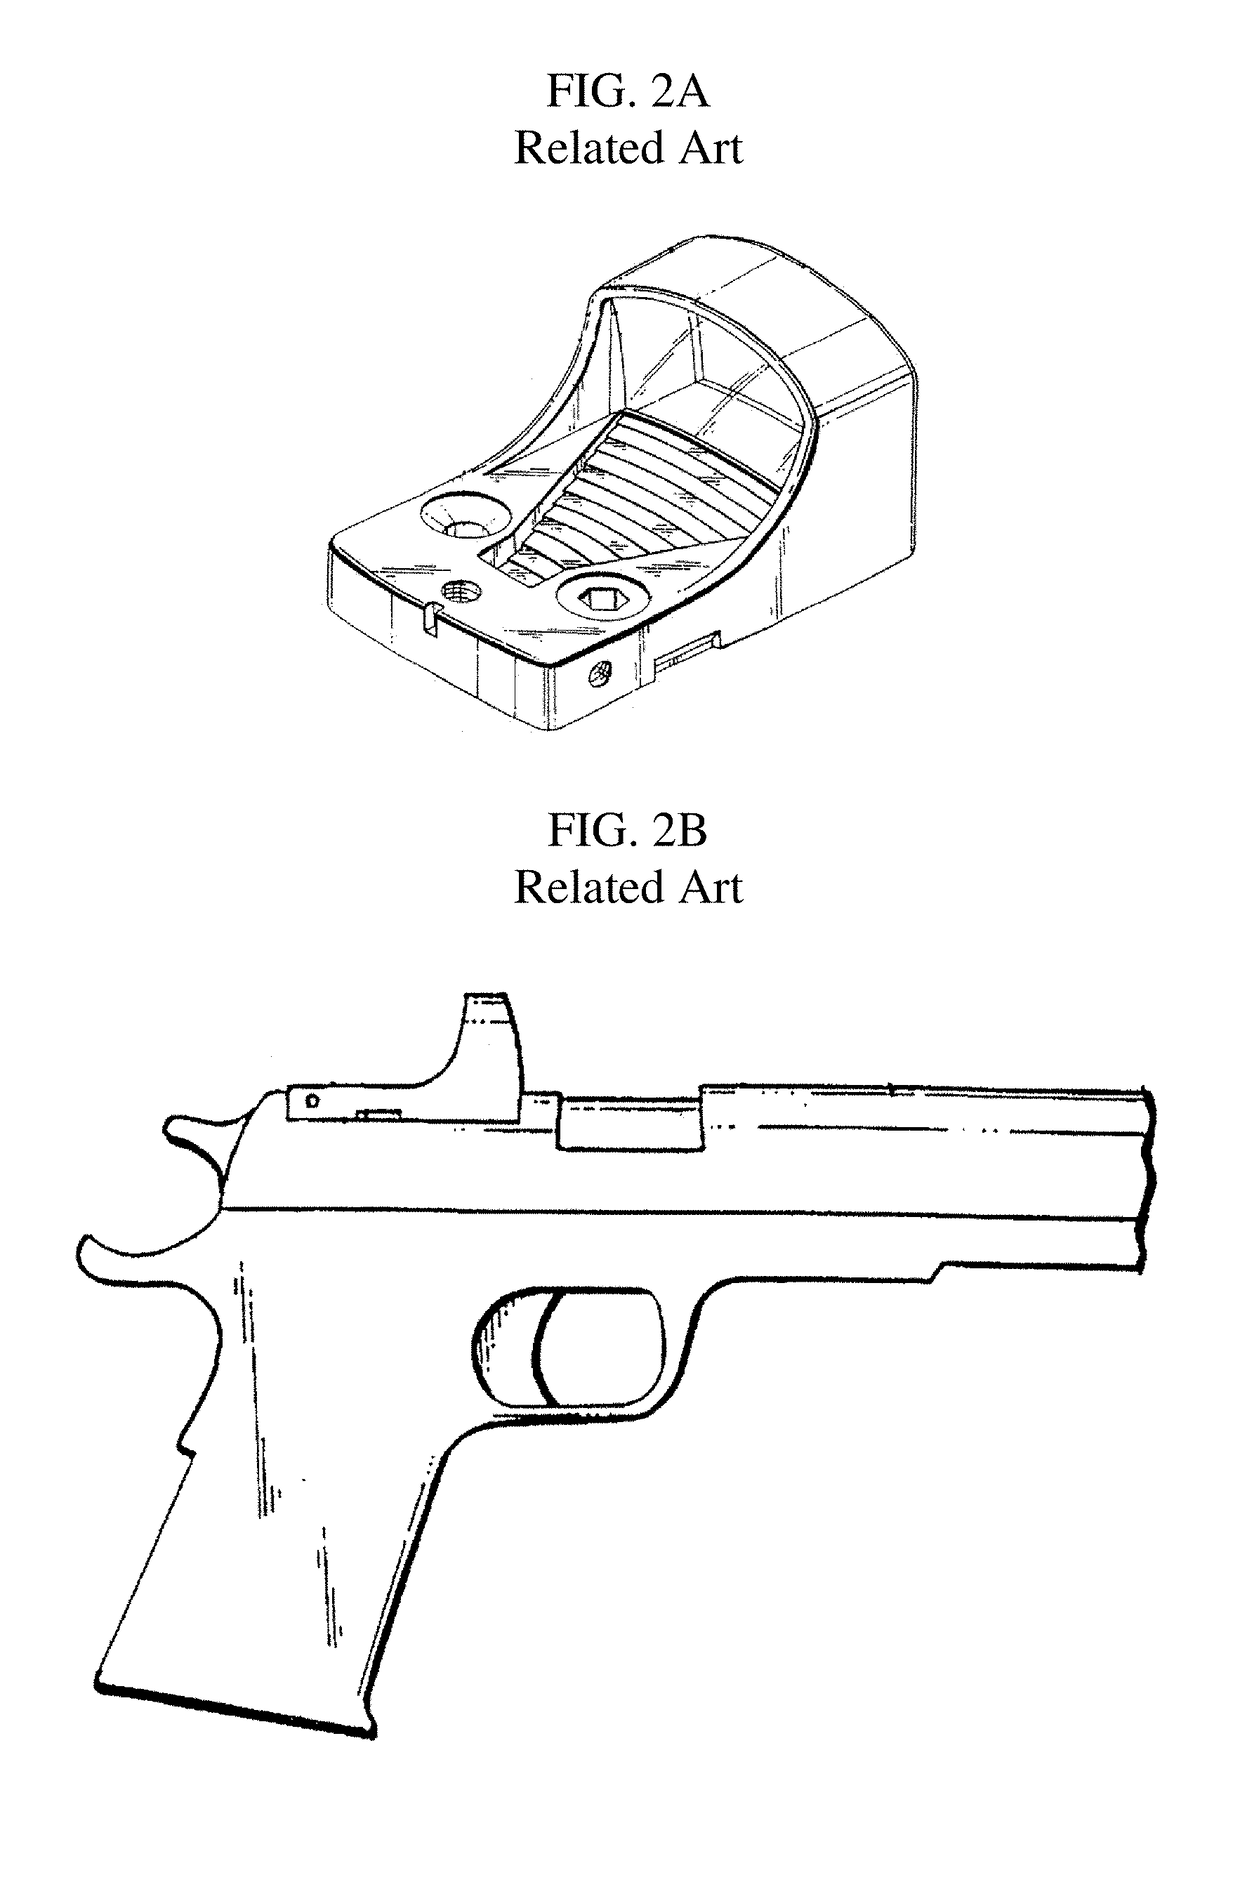 Collapsible reflective sight for a firearm including a locking mechanism